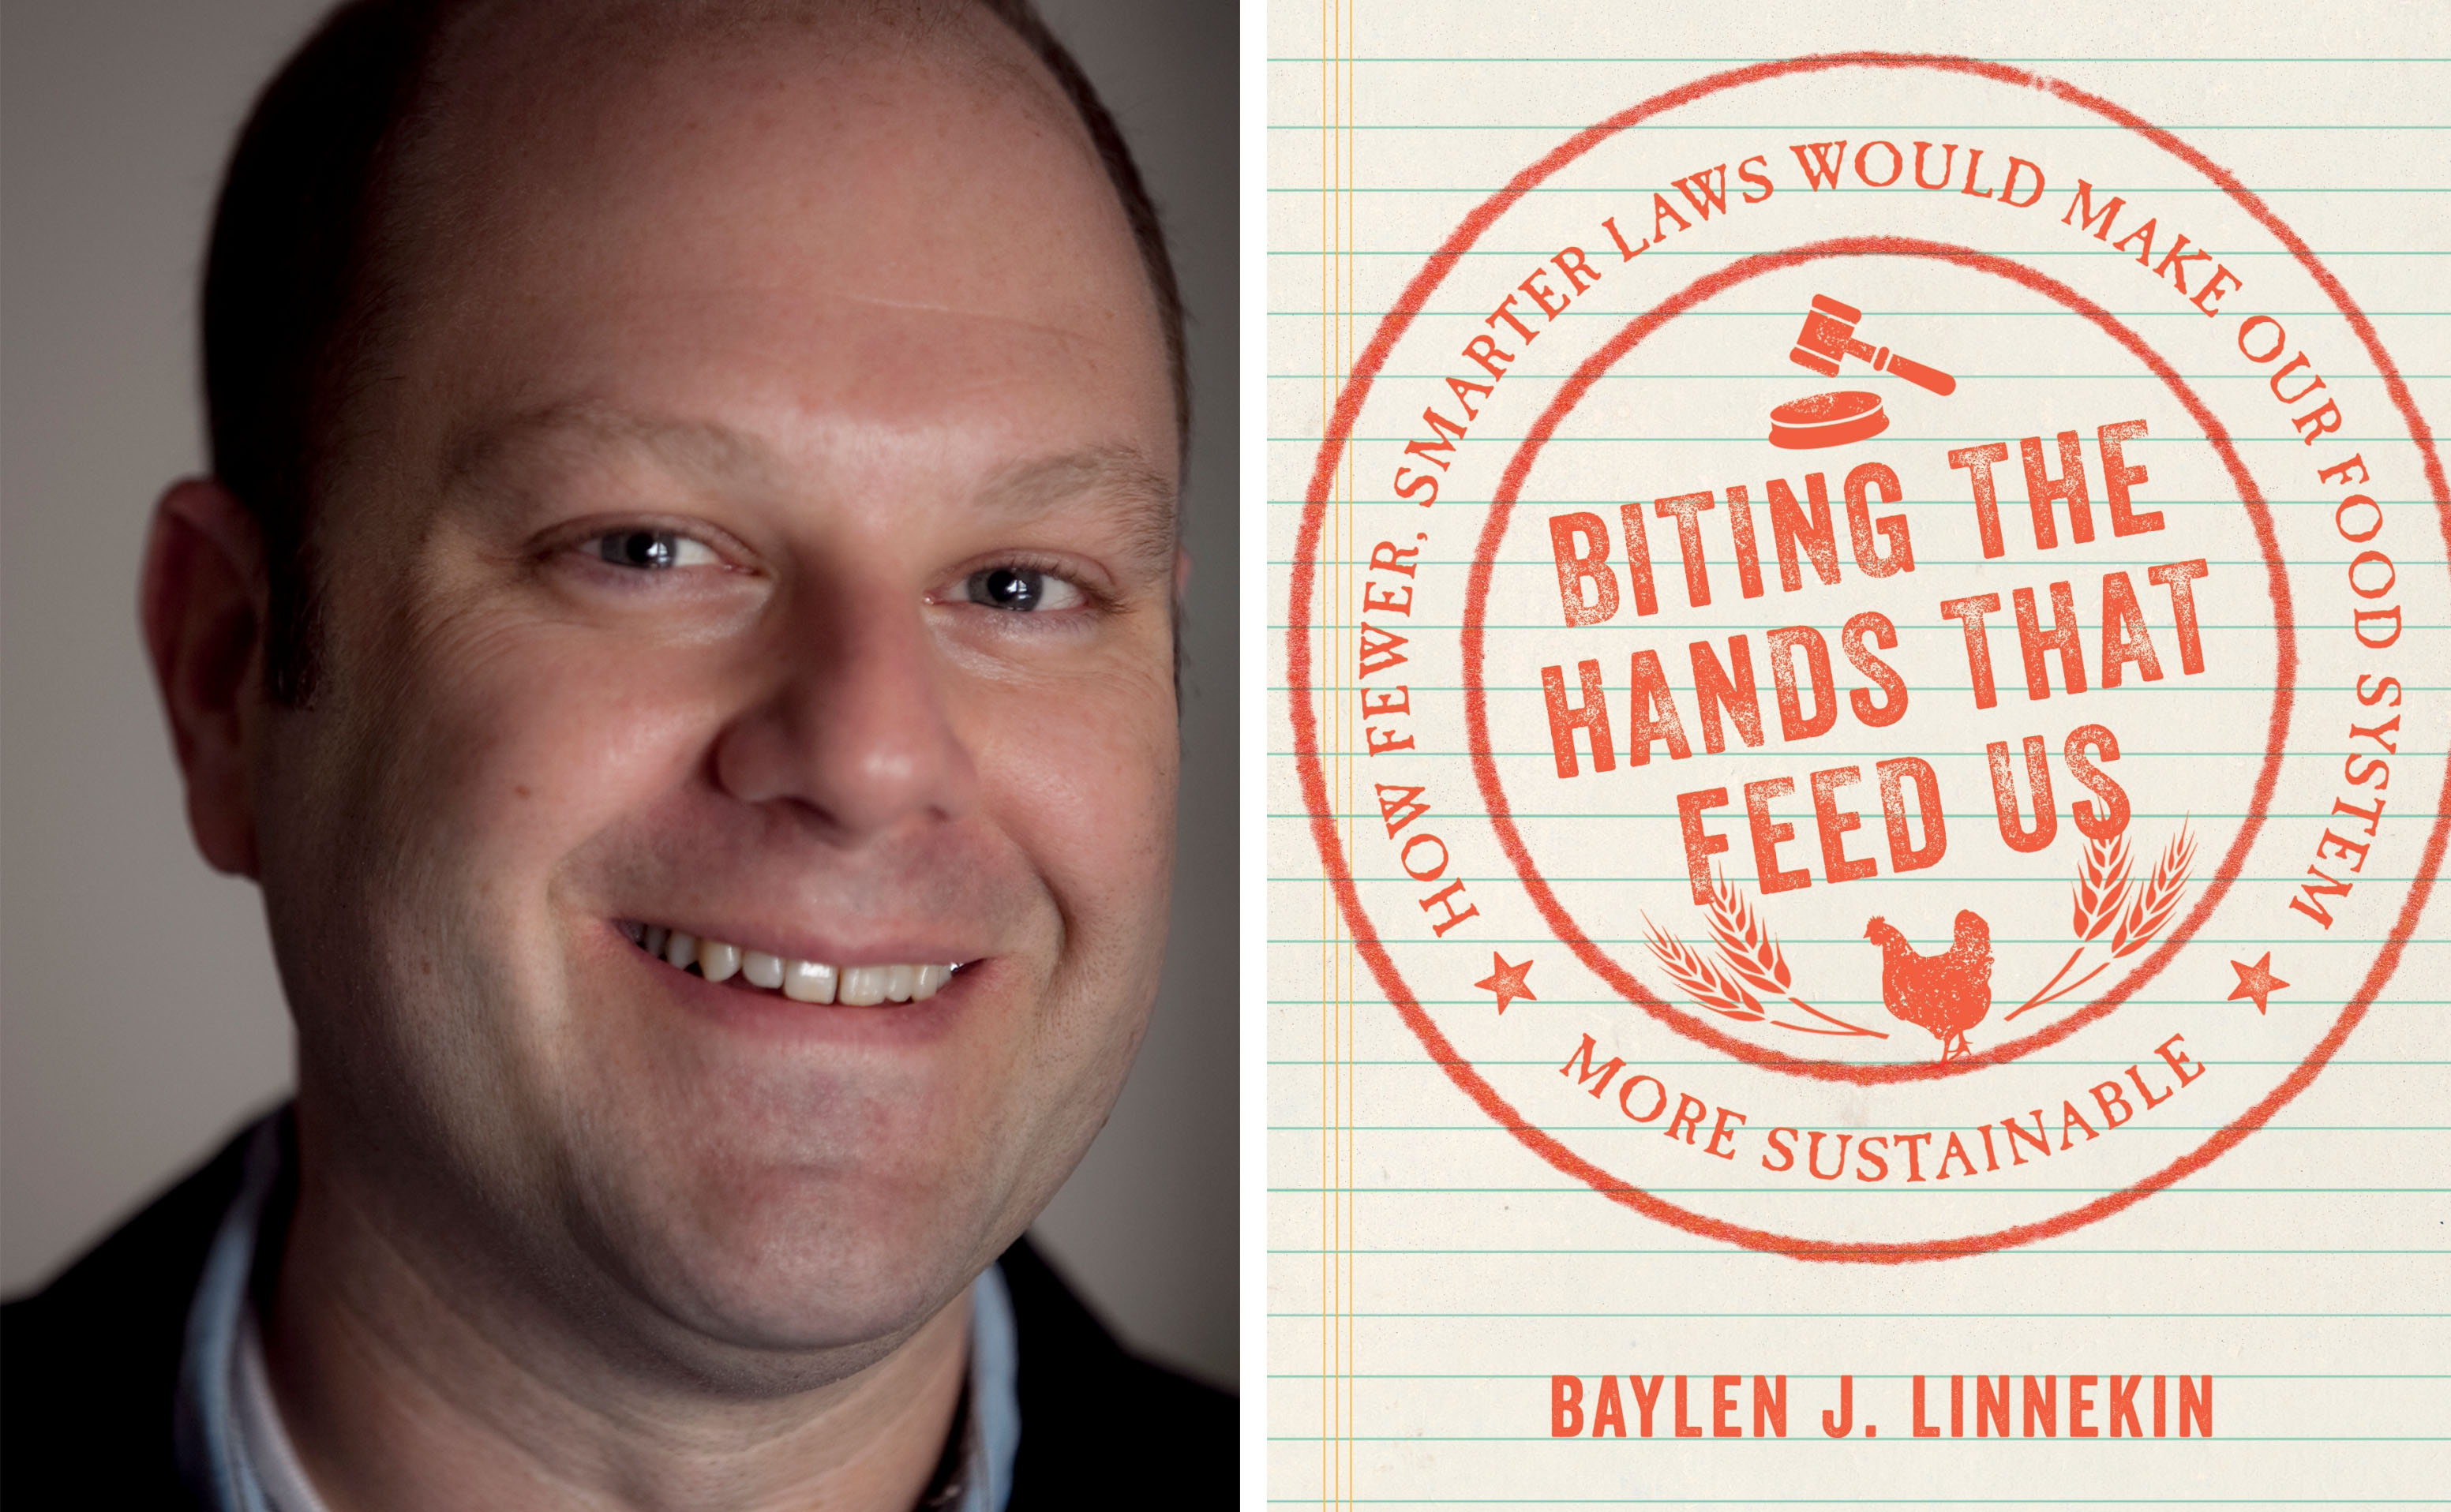 Baylen Linnekin is the author of "Biting the Hands that Feed Us: How Fewer, Smarter Laws Would Make Our Food System More Sustainable", a book about our failing food regulations.